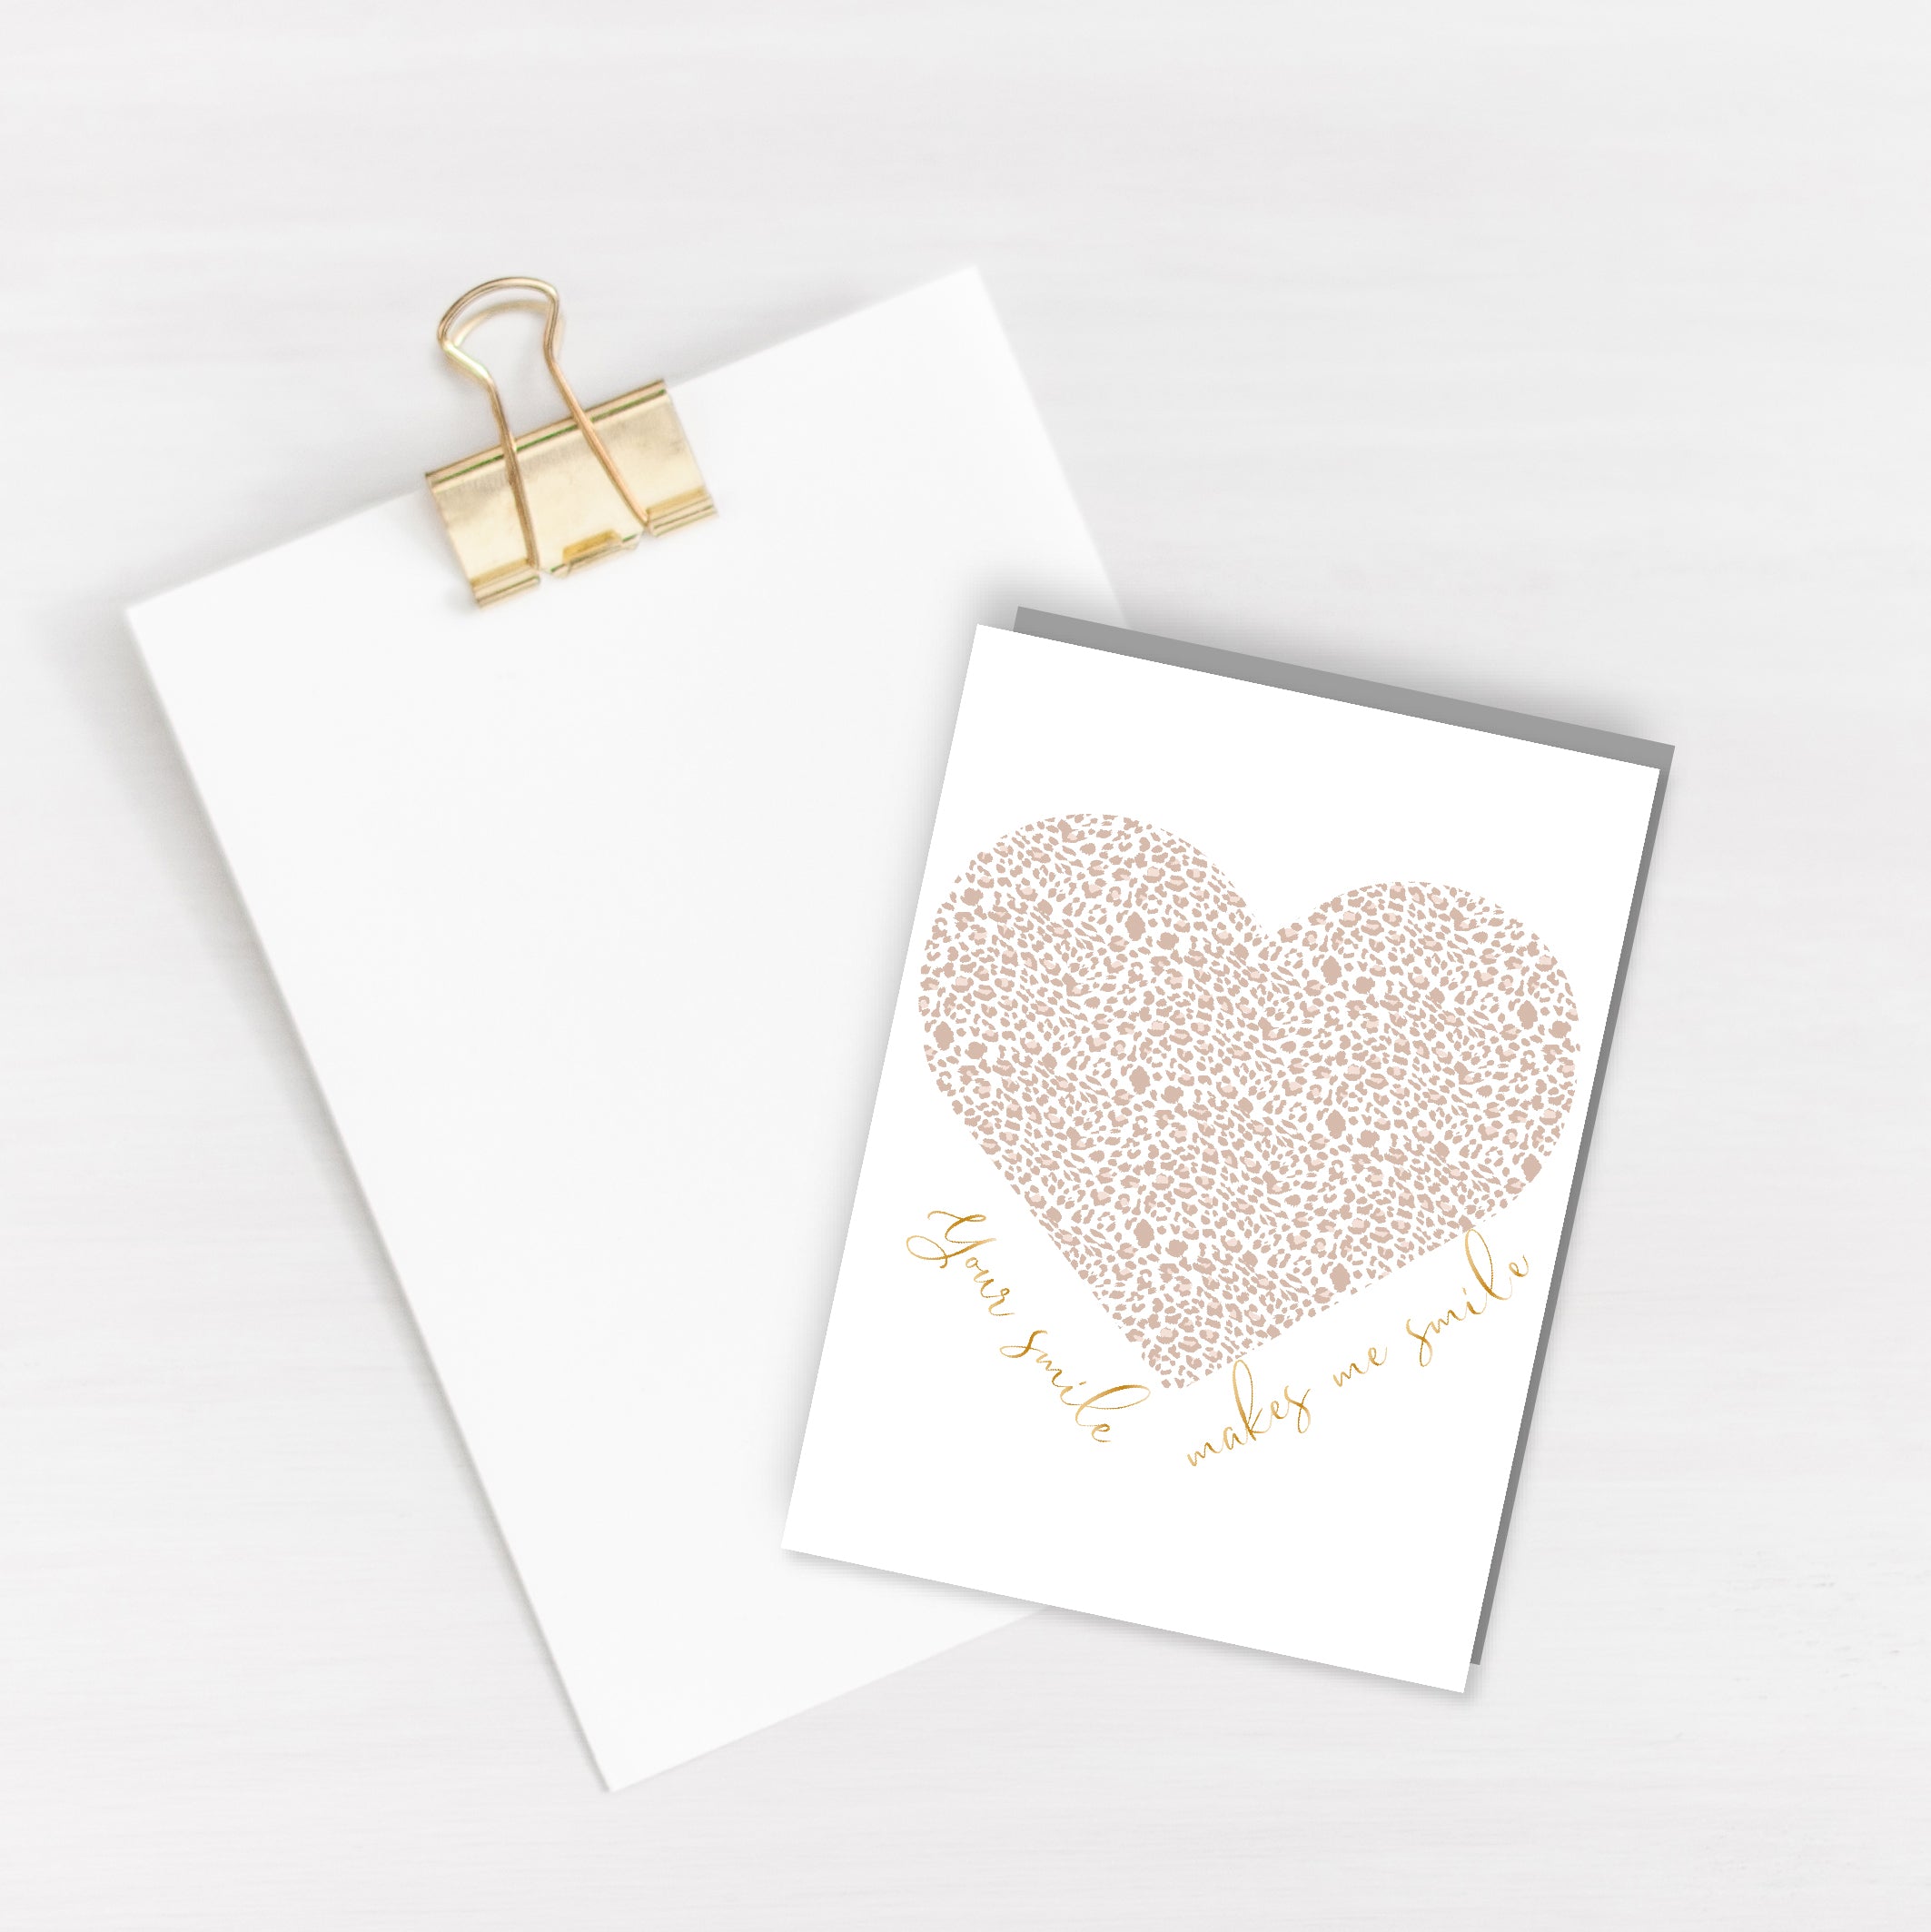 Your smile makes me smile Card - Gold Foiled